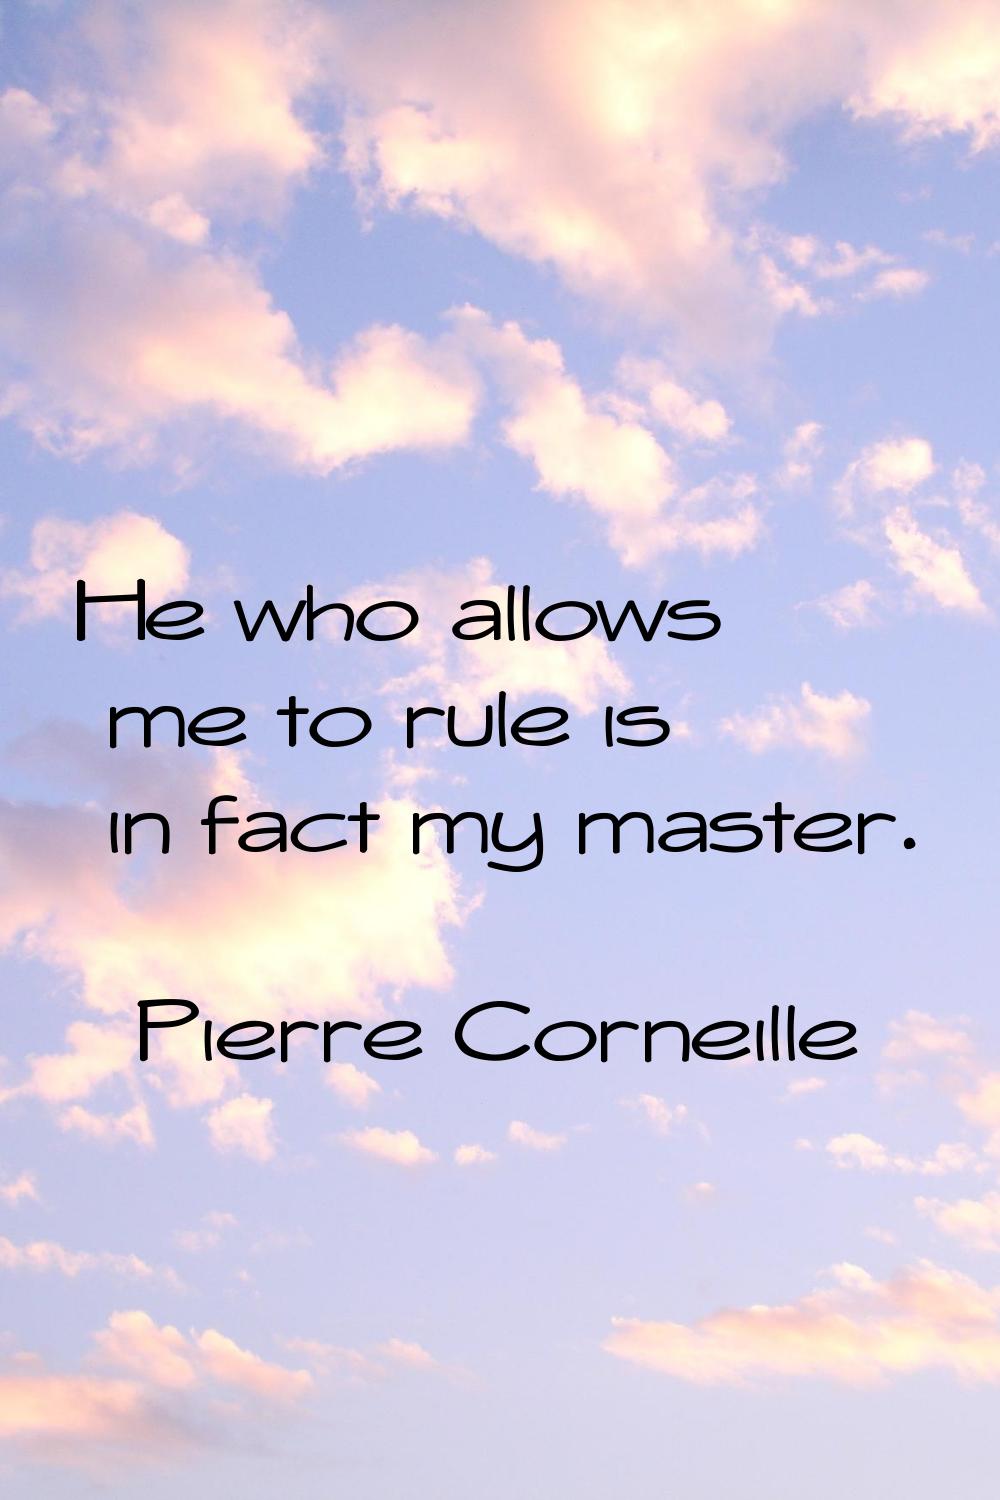 He who allows me to rule is in fact my master.